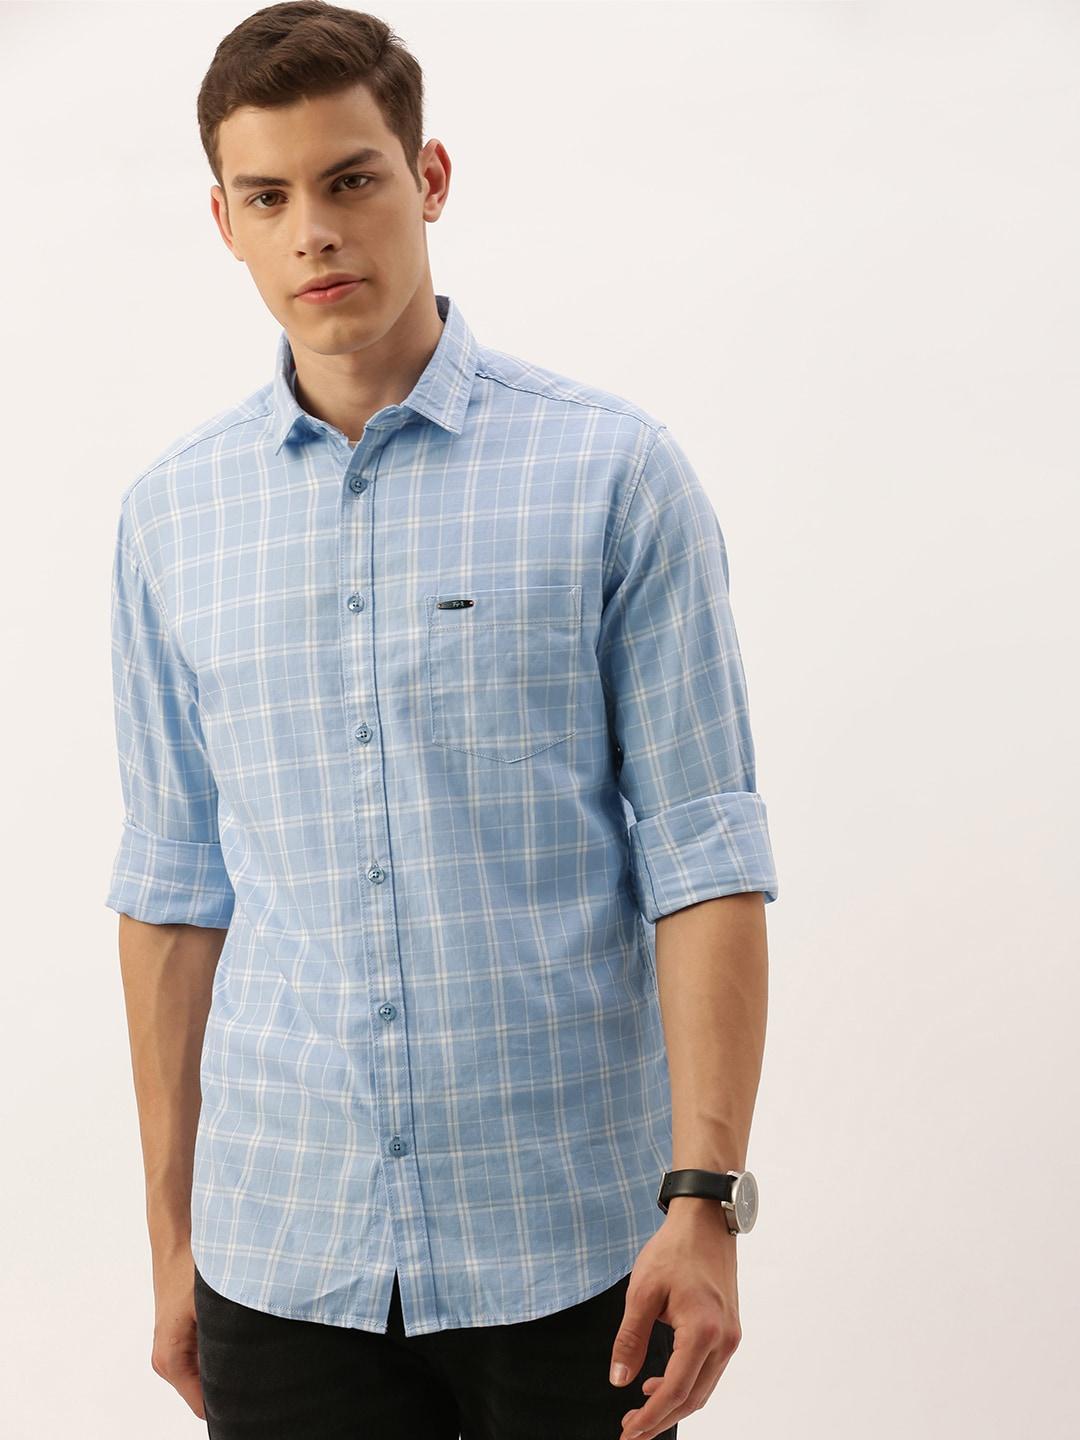 The Indian Garage Co Men Blue & White Slim Fit Checked Casual Shirt